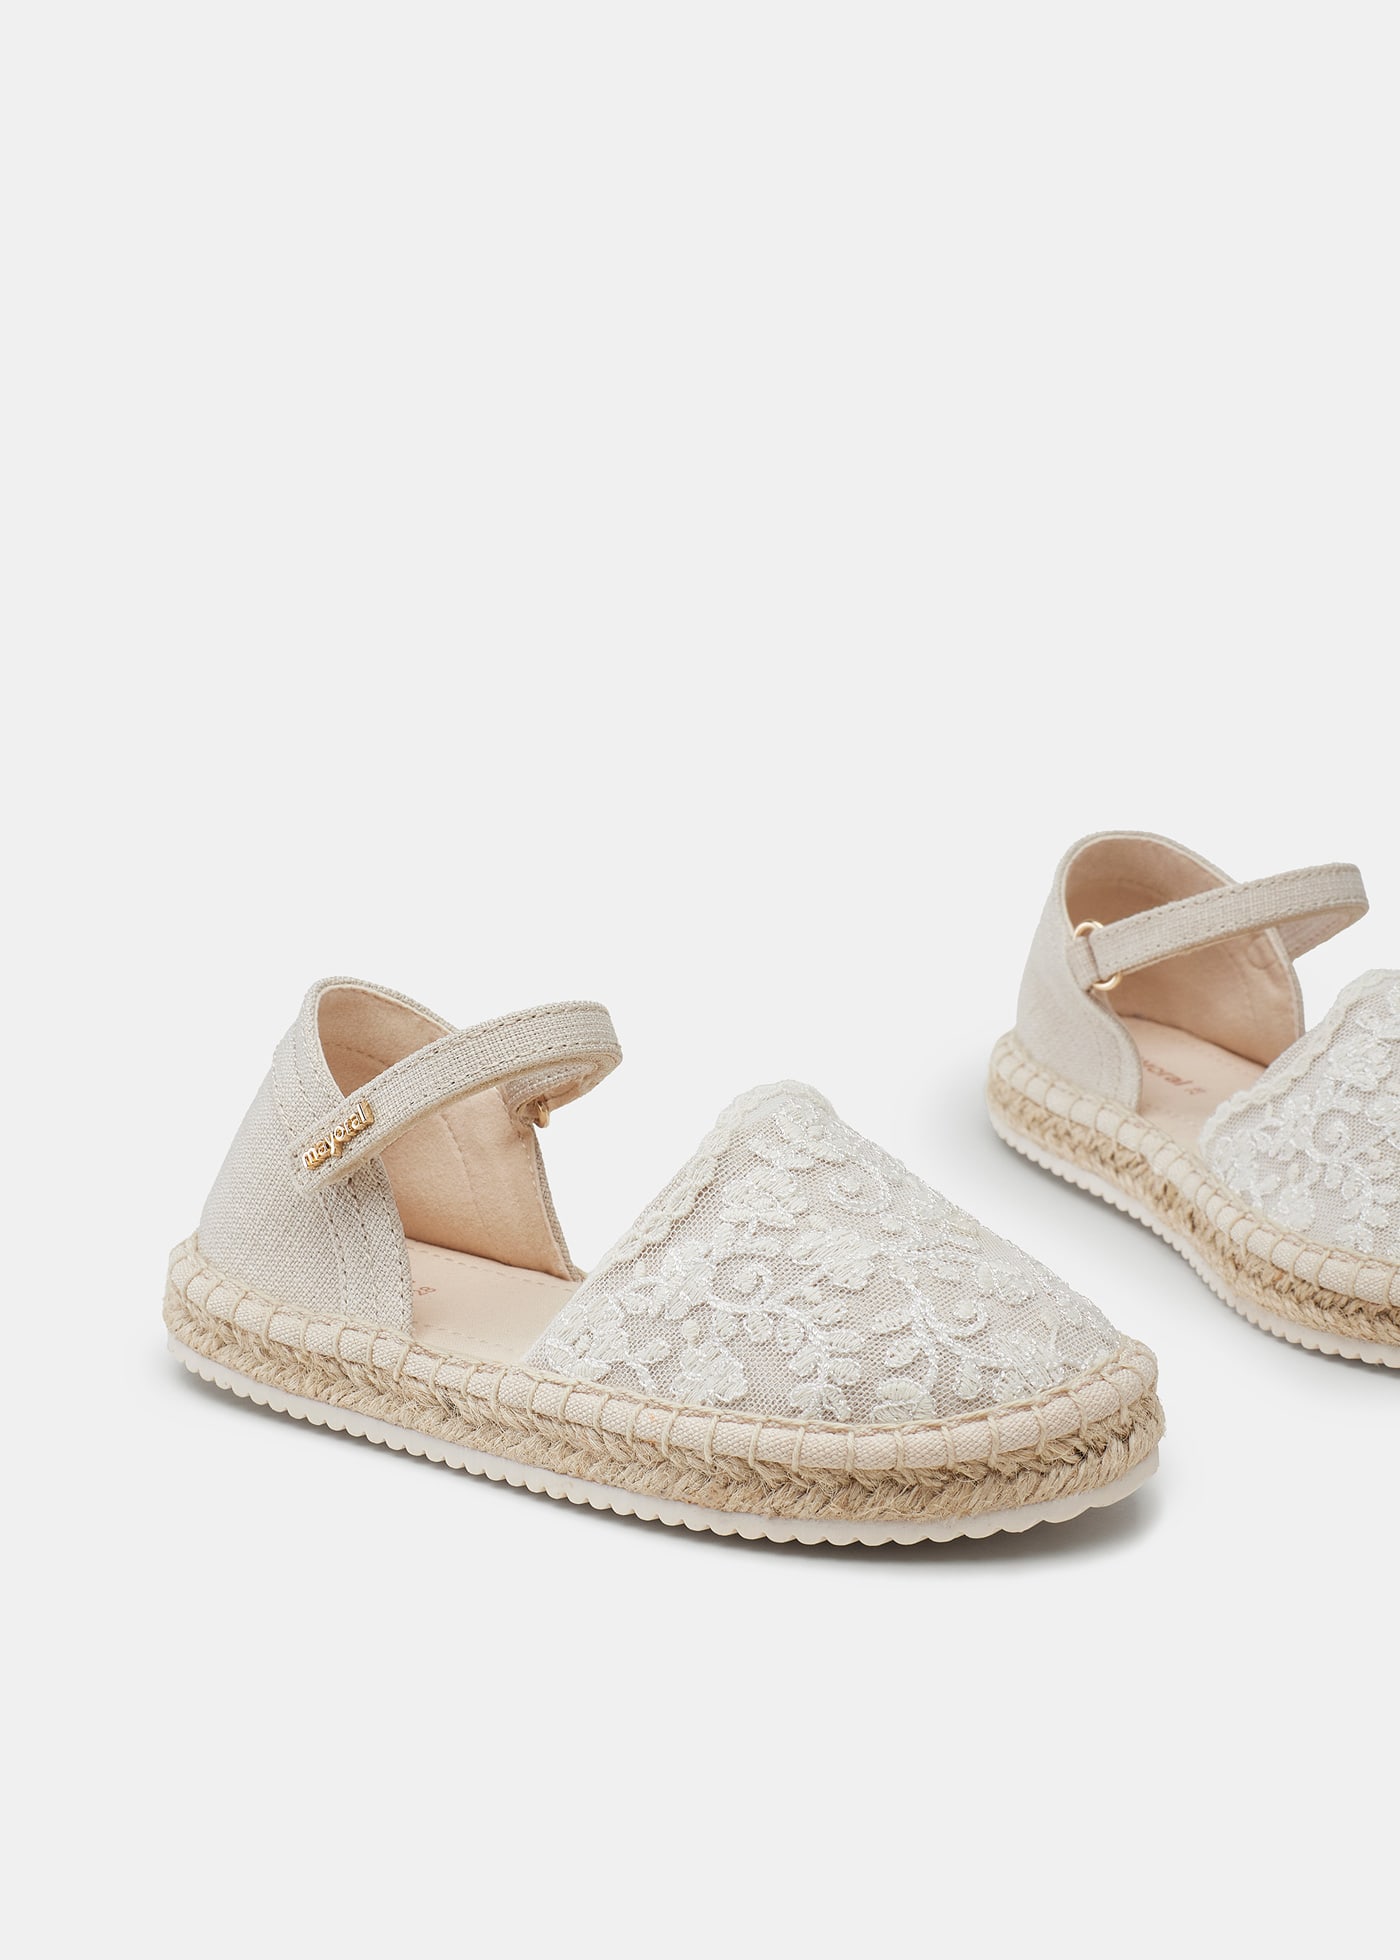 Girls laced espadrilles